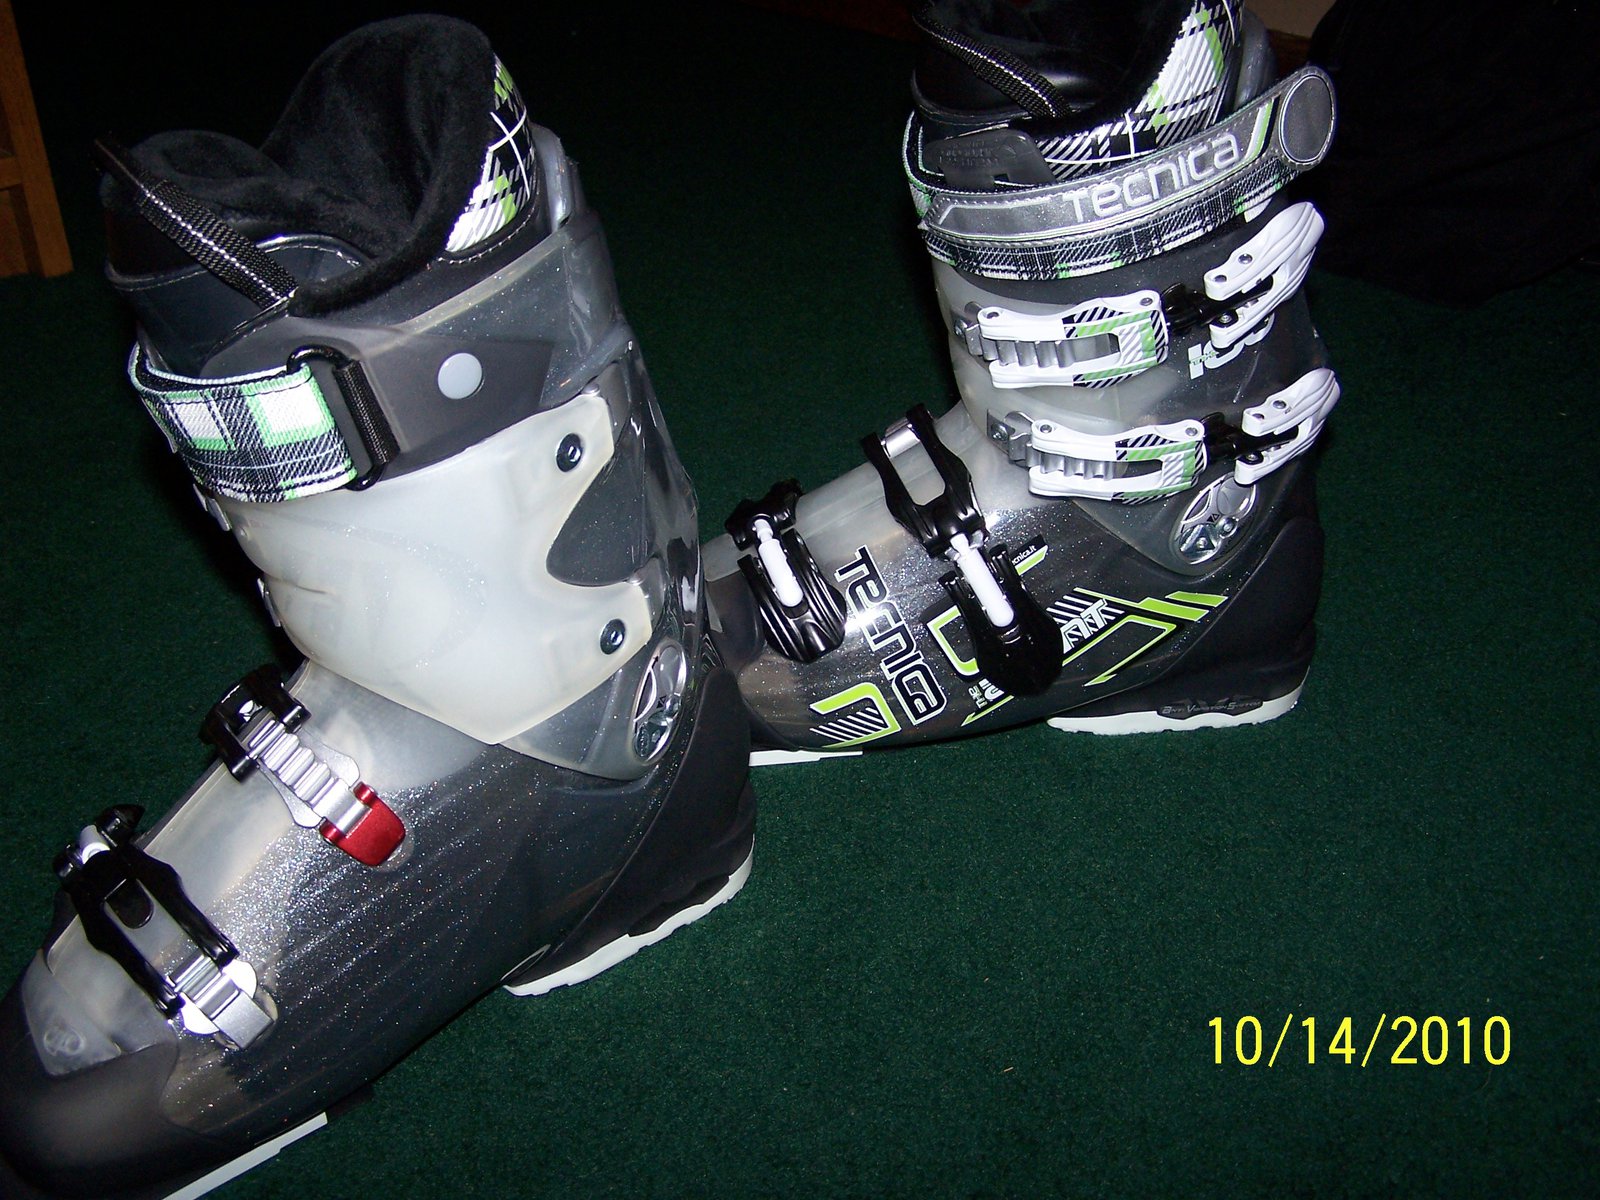 New Skis n Boots - 3 of 3